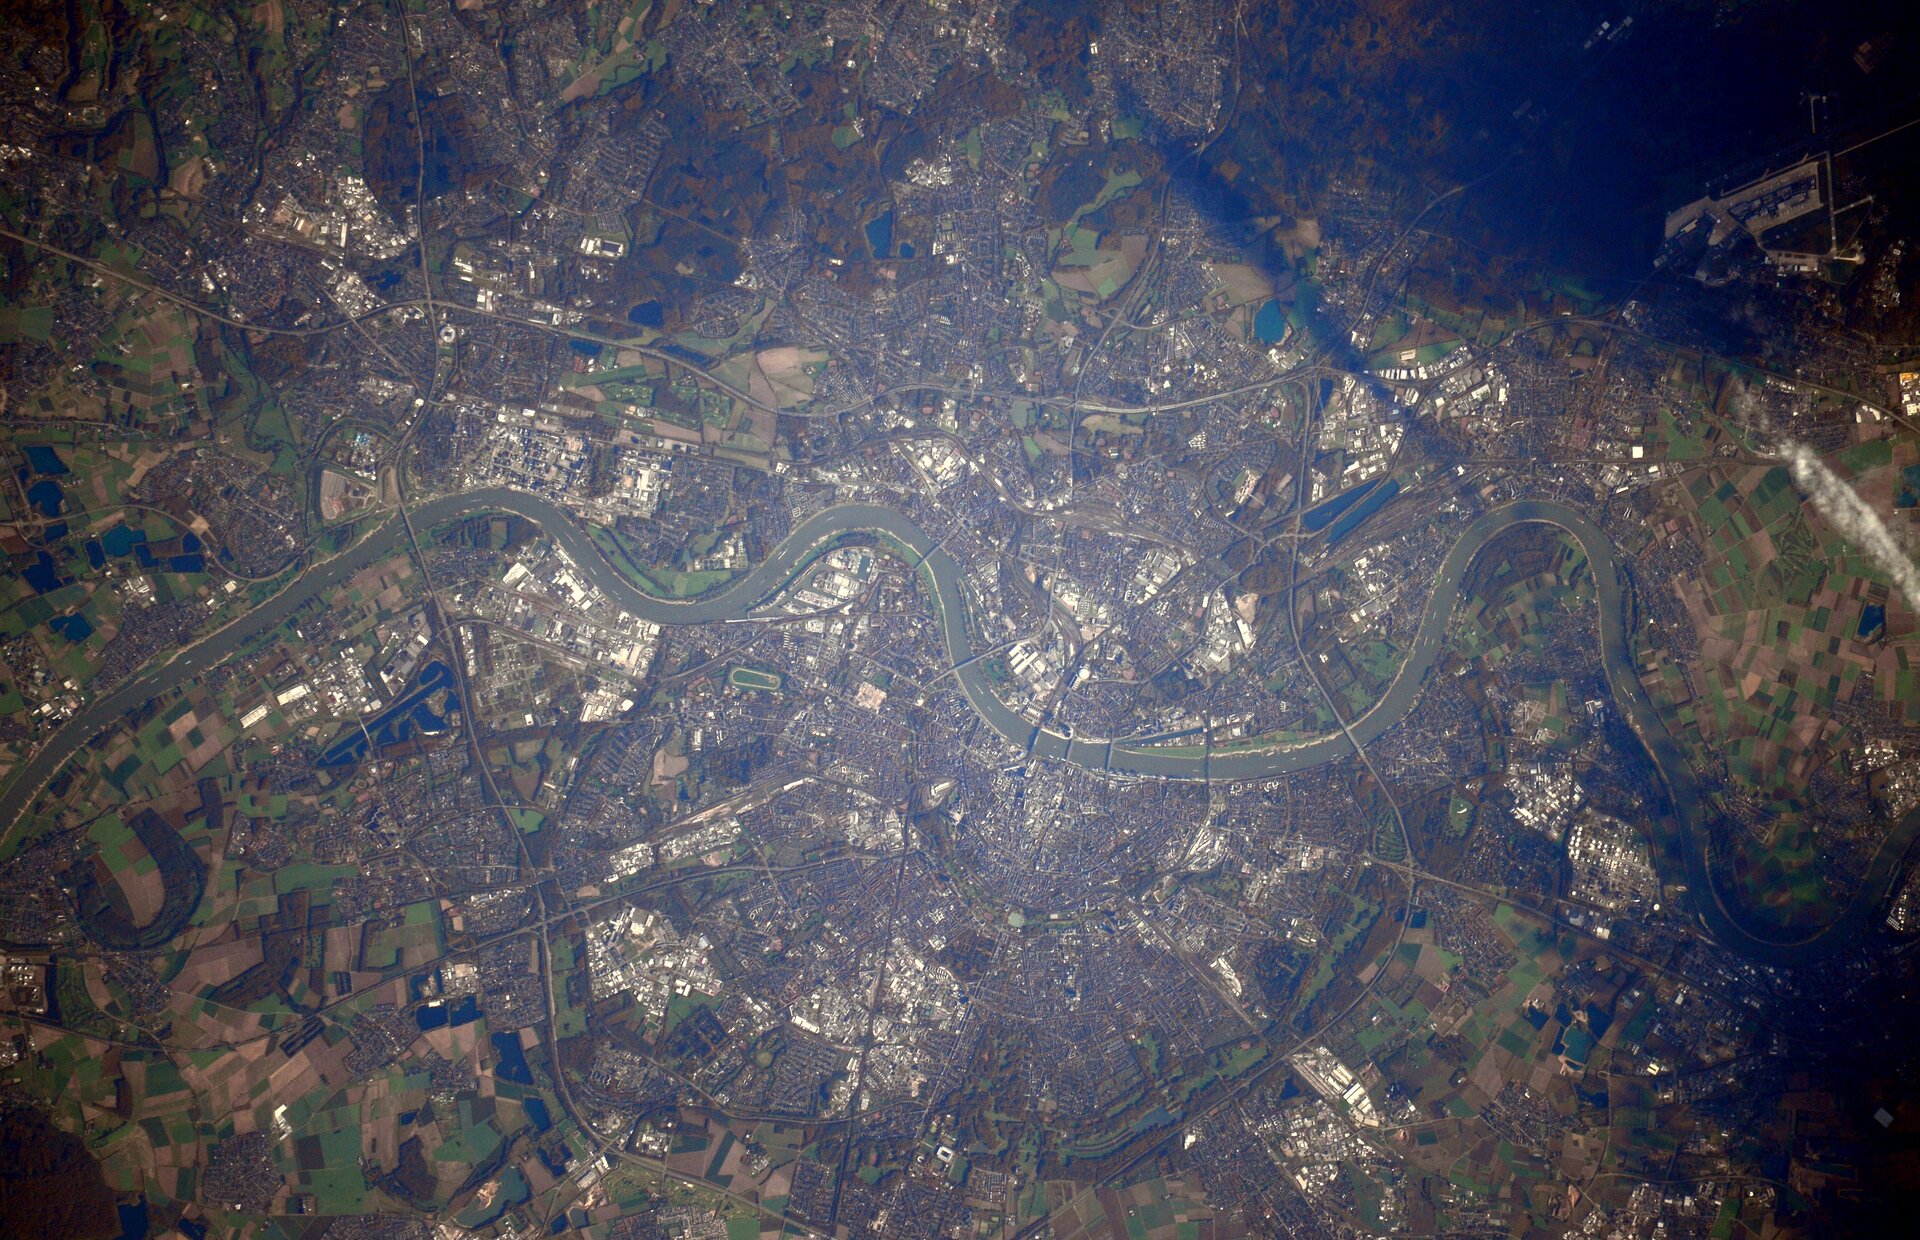 Cologne from space